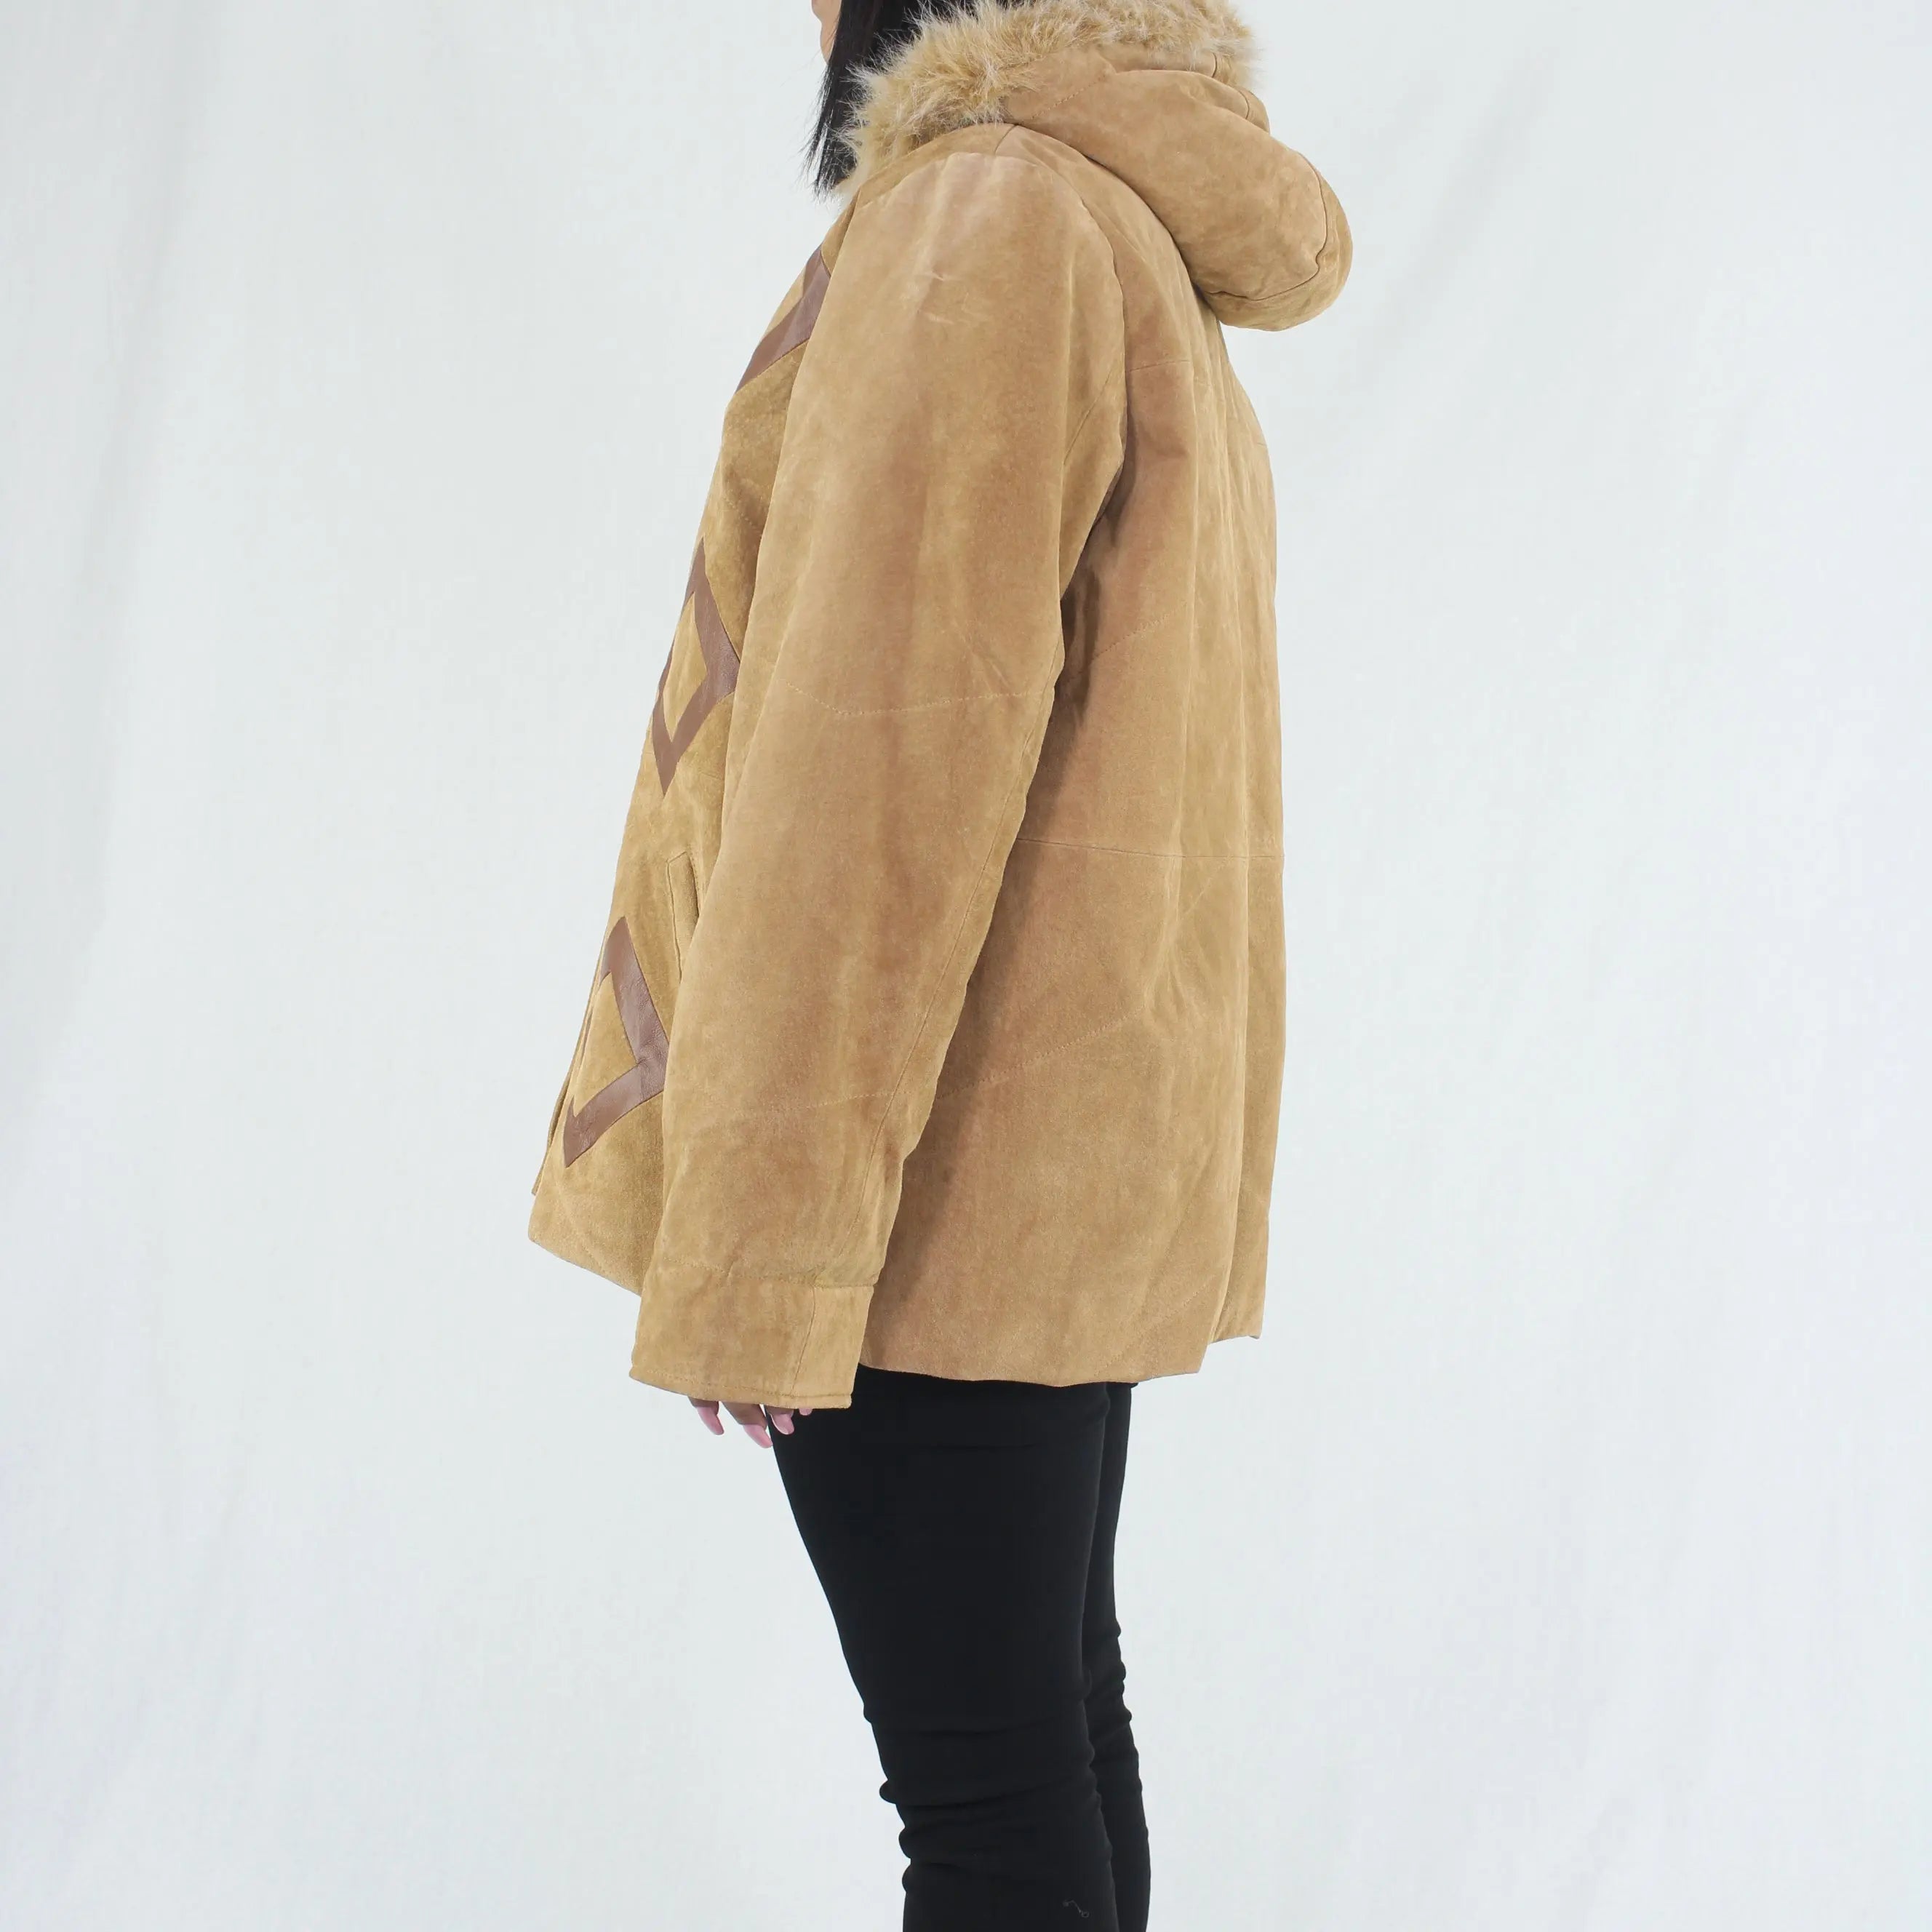 Unknown - Brown Leather Coat- ThriftTale.com - Vintage and second handclothing